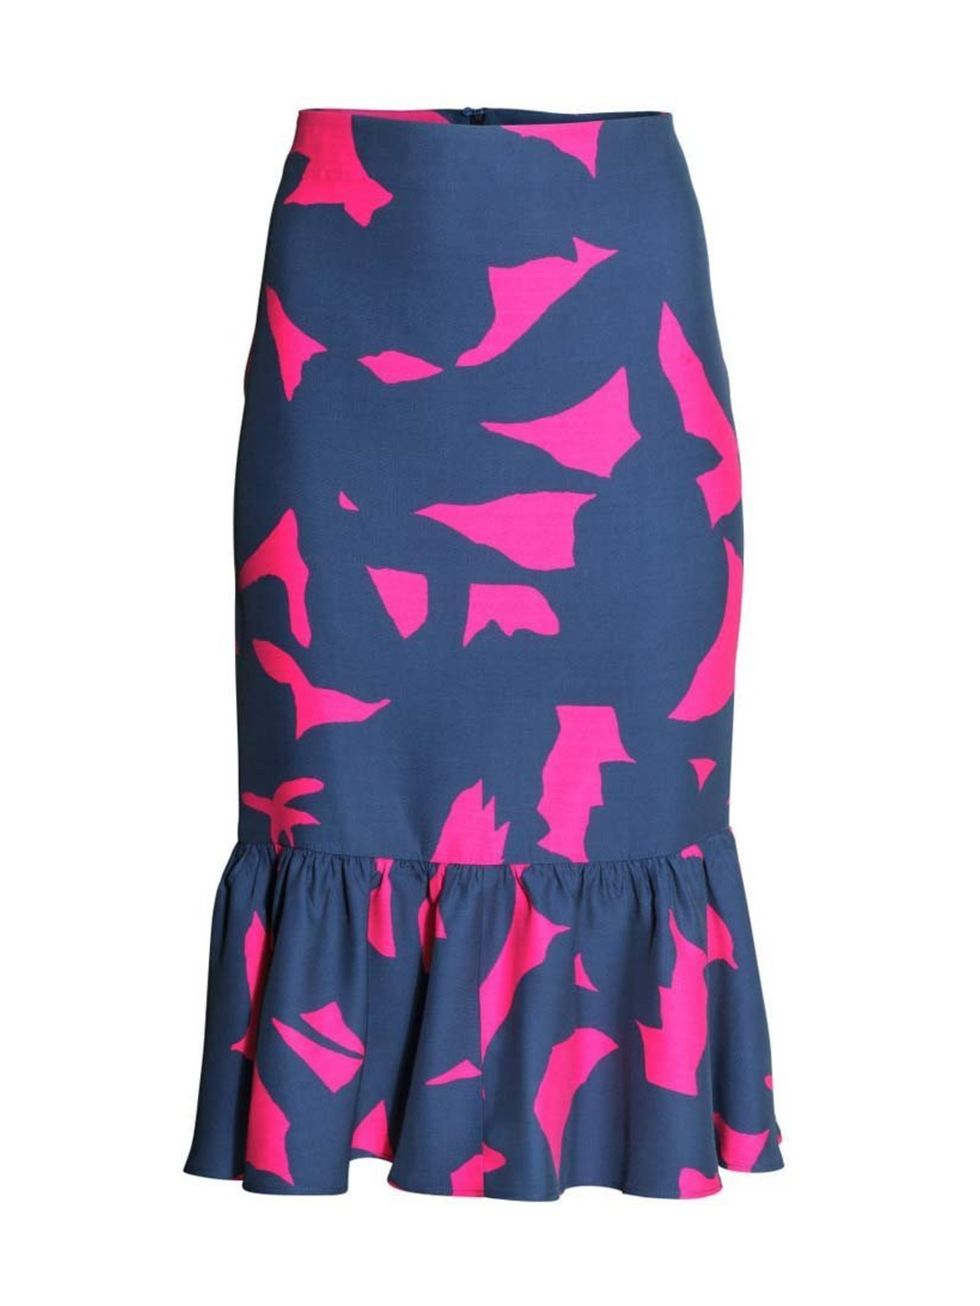 Brilliant design, with a high street price tag.

H&M skirt, £29.99